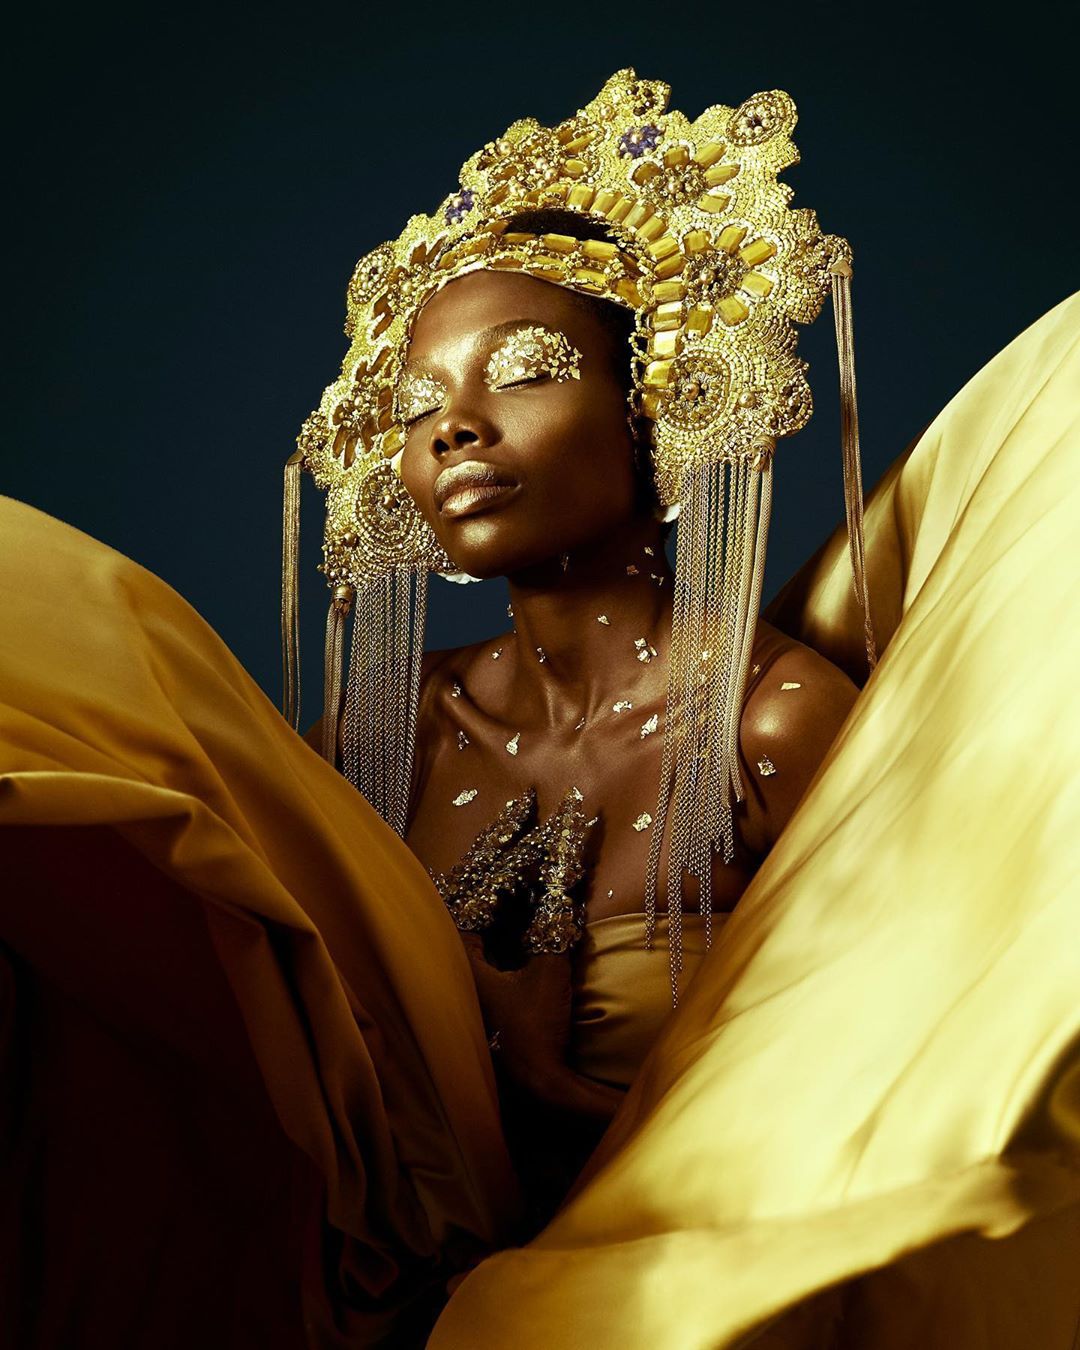 20 Rare And Beautiful Examples Of Black Women In Fantasy Photoshoots ...